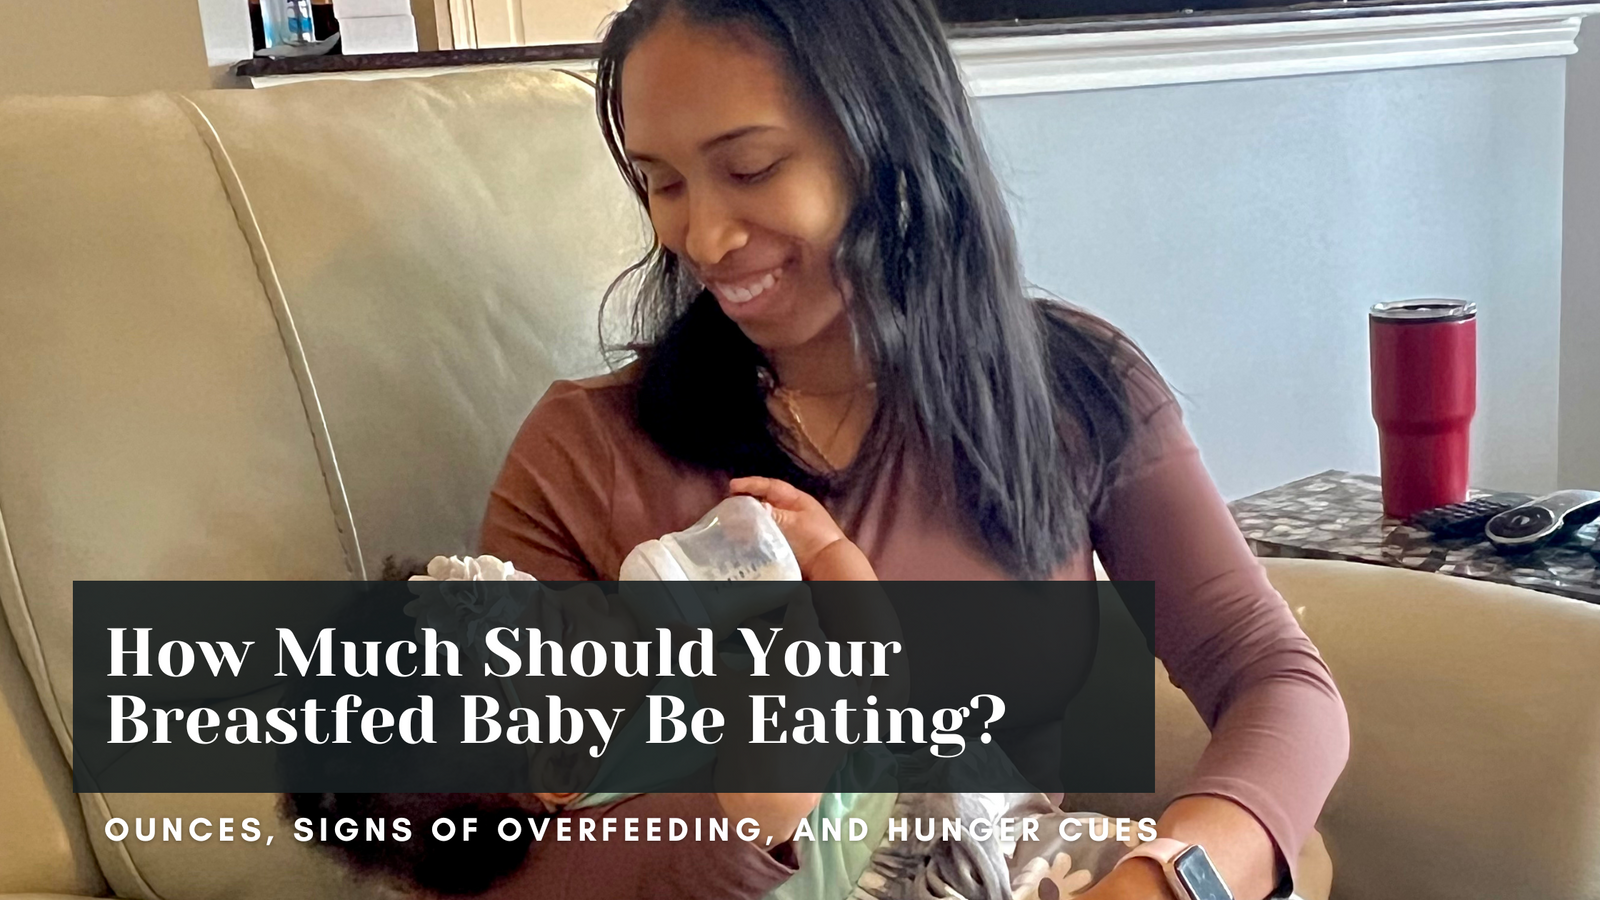 How Much Should My Breastfed Baby Be Eating? (Am I Overfeeding?)